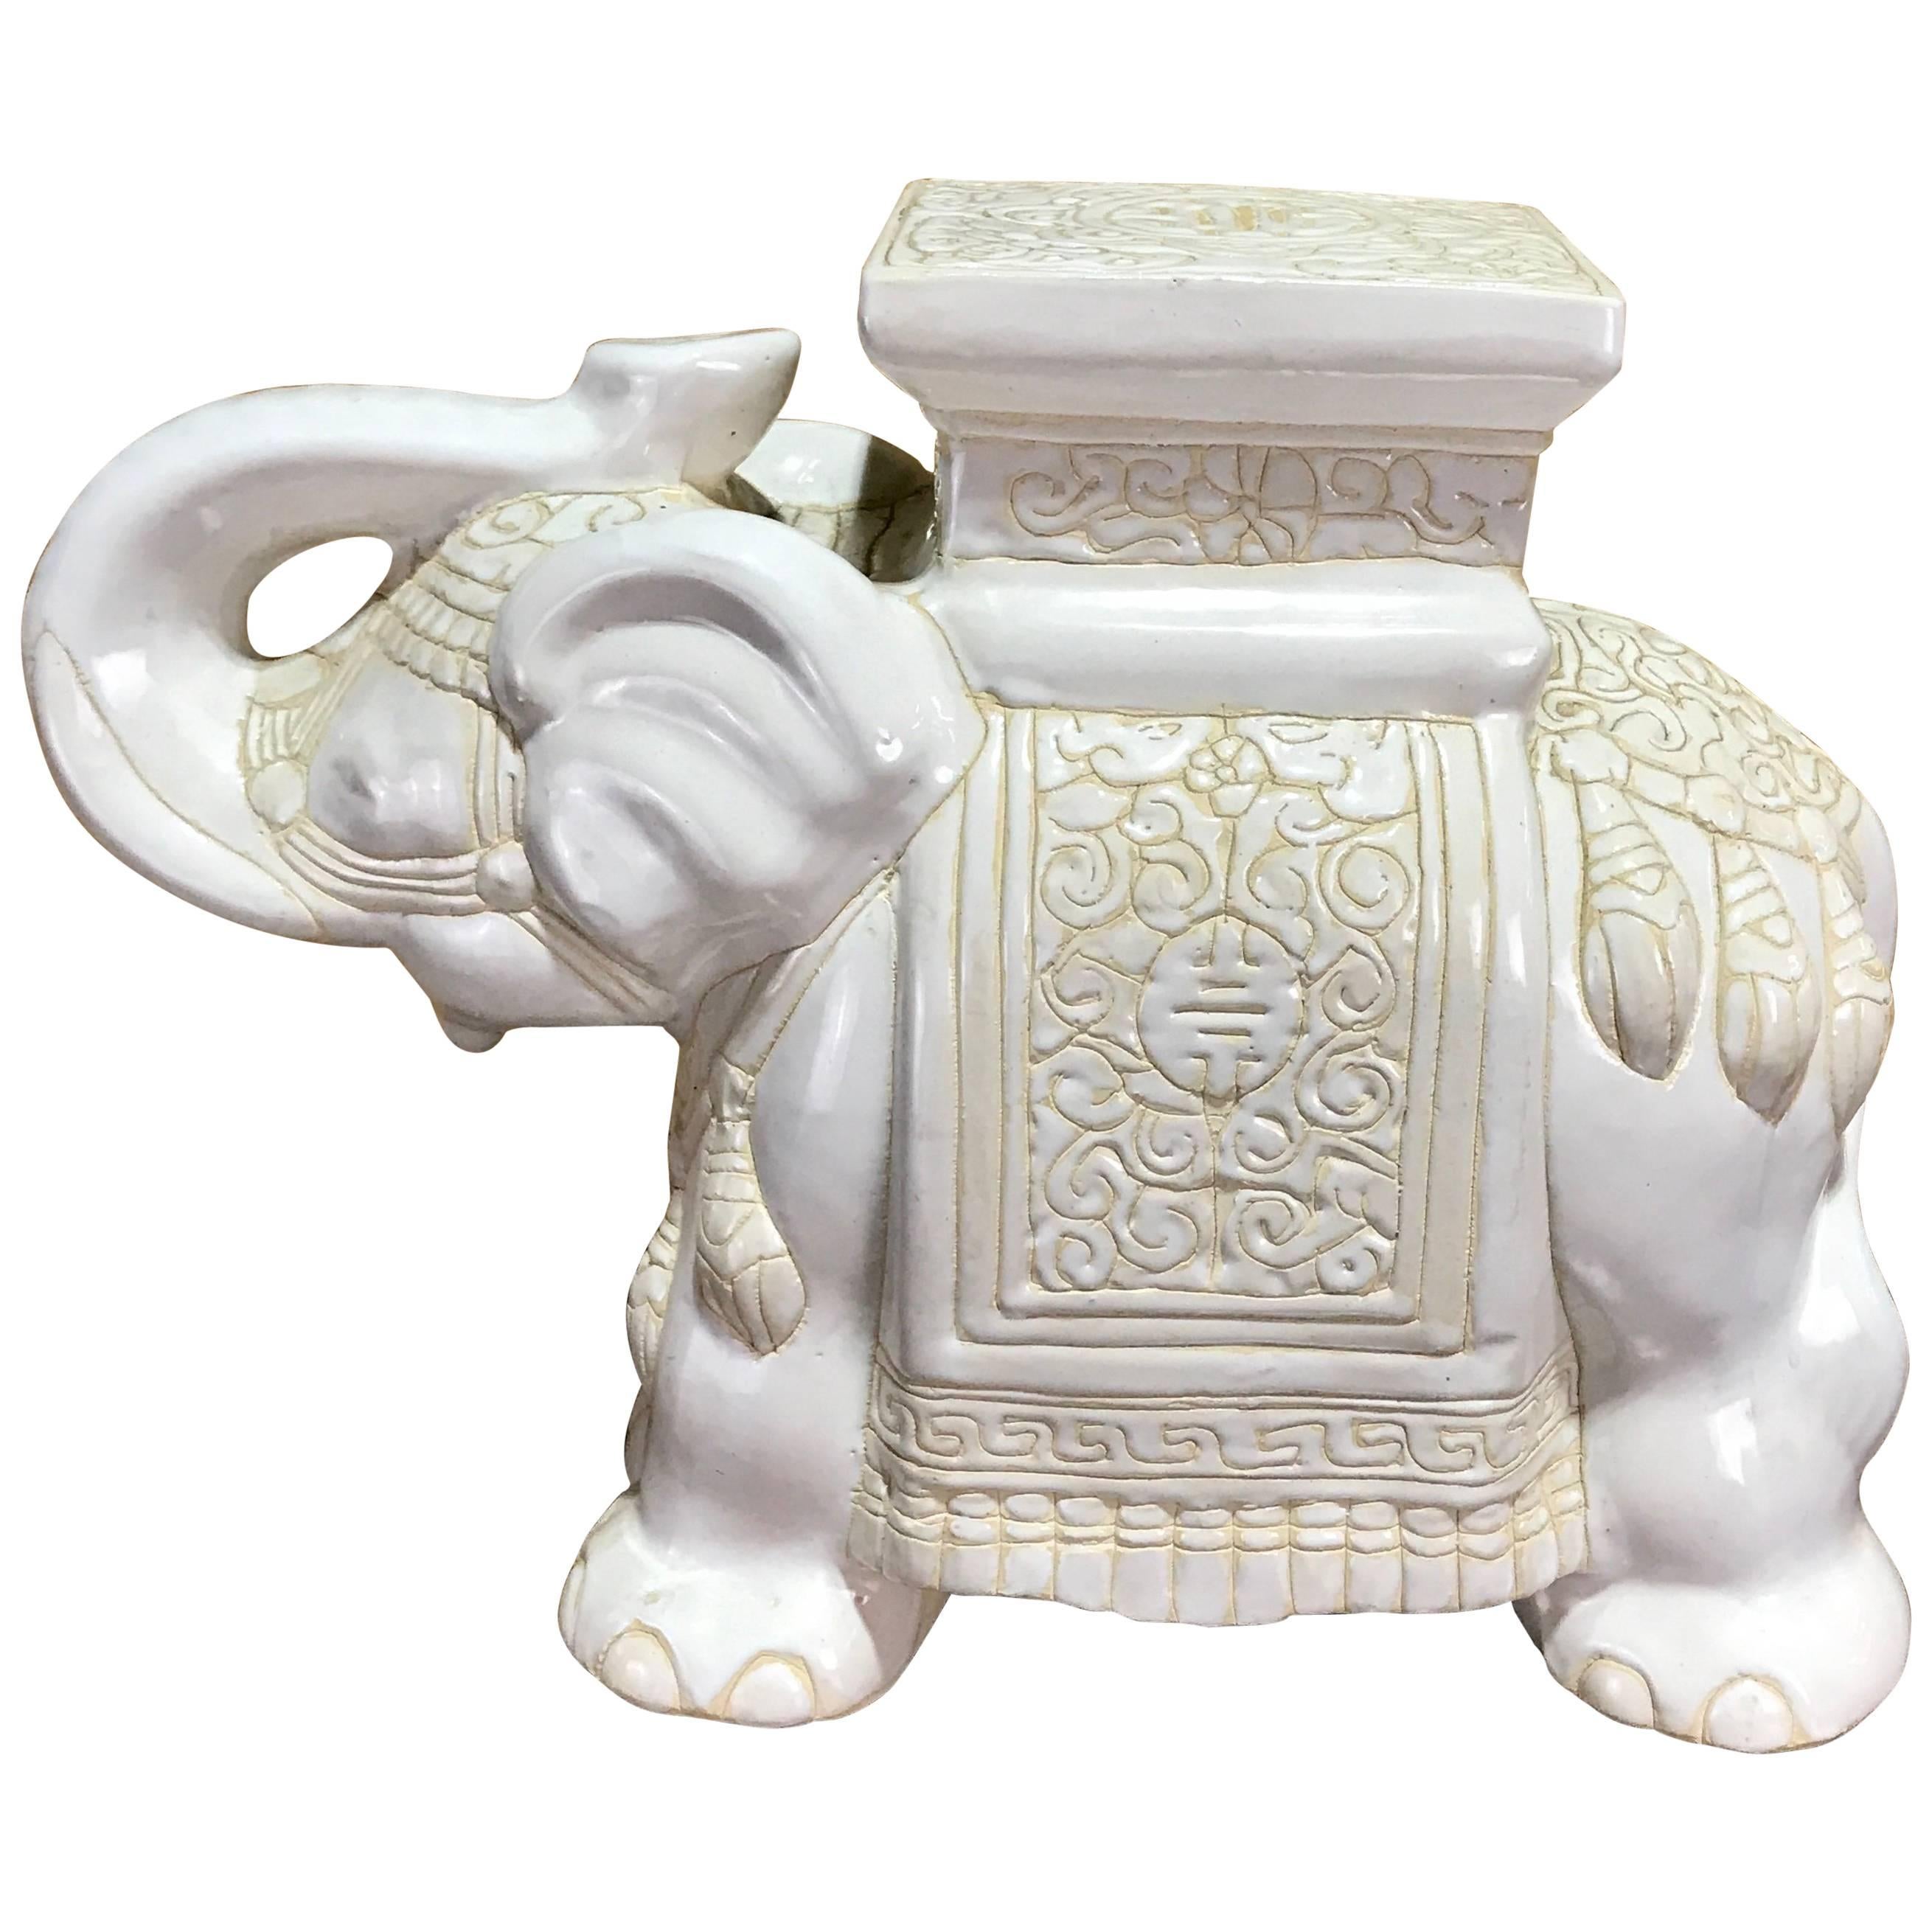 Midcentury Porcelain Standing Elephant Garden Seat in White and Yellow